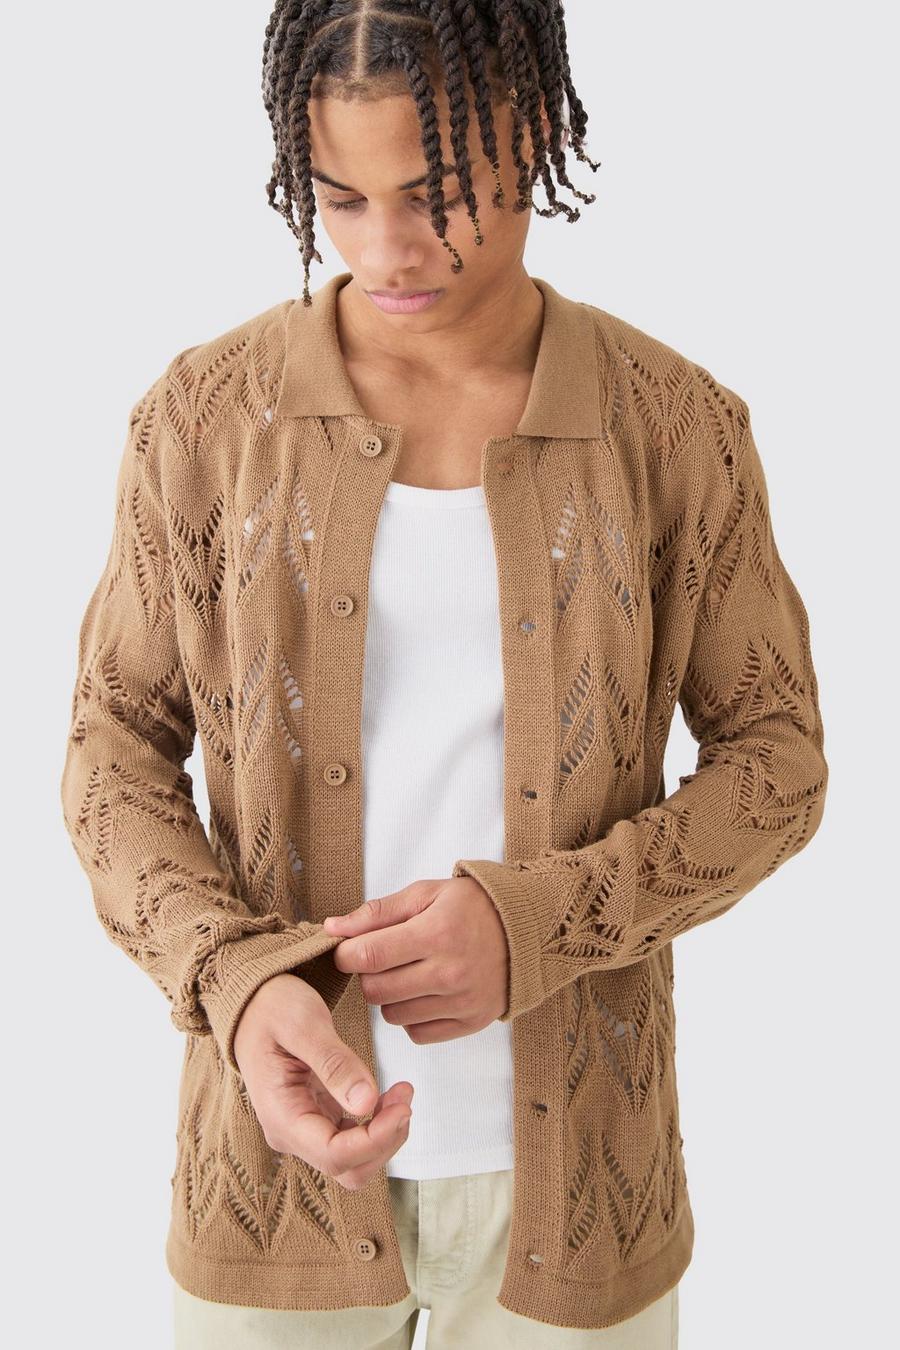 Long Sleeve Open Knit CAMICIA In Tan